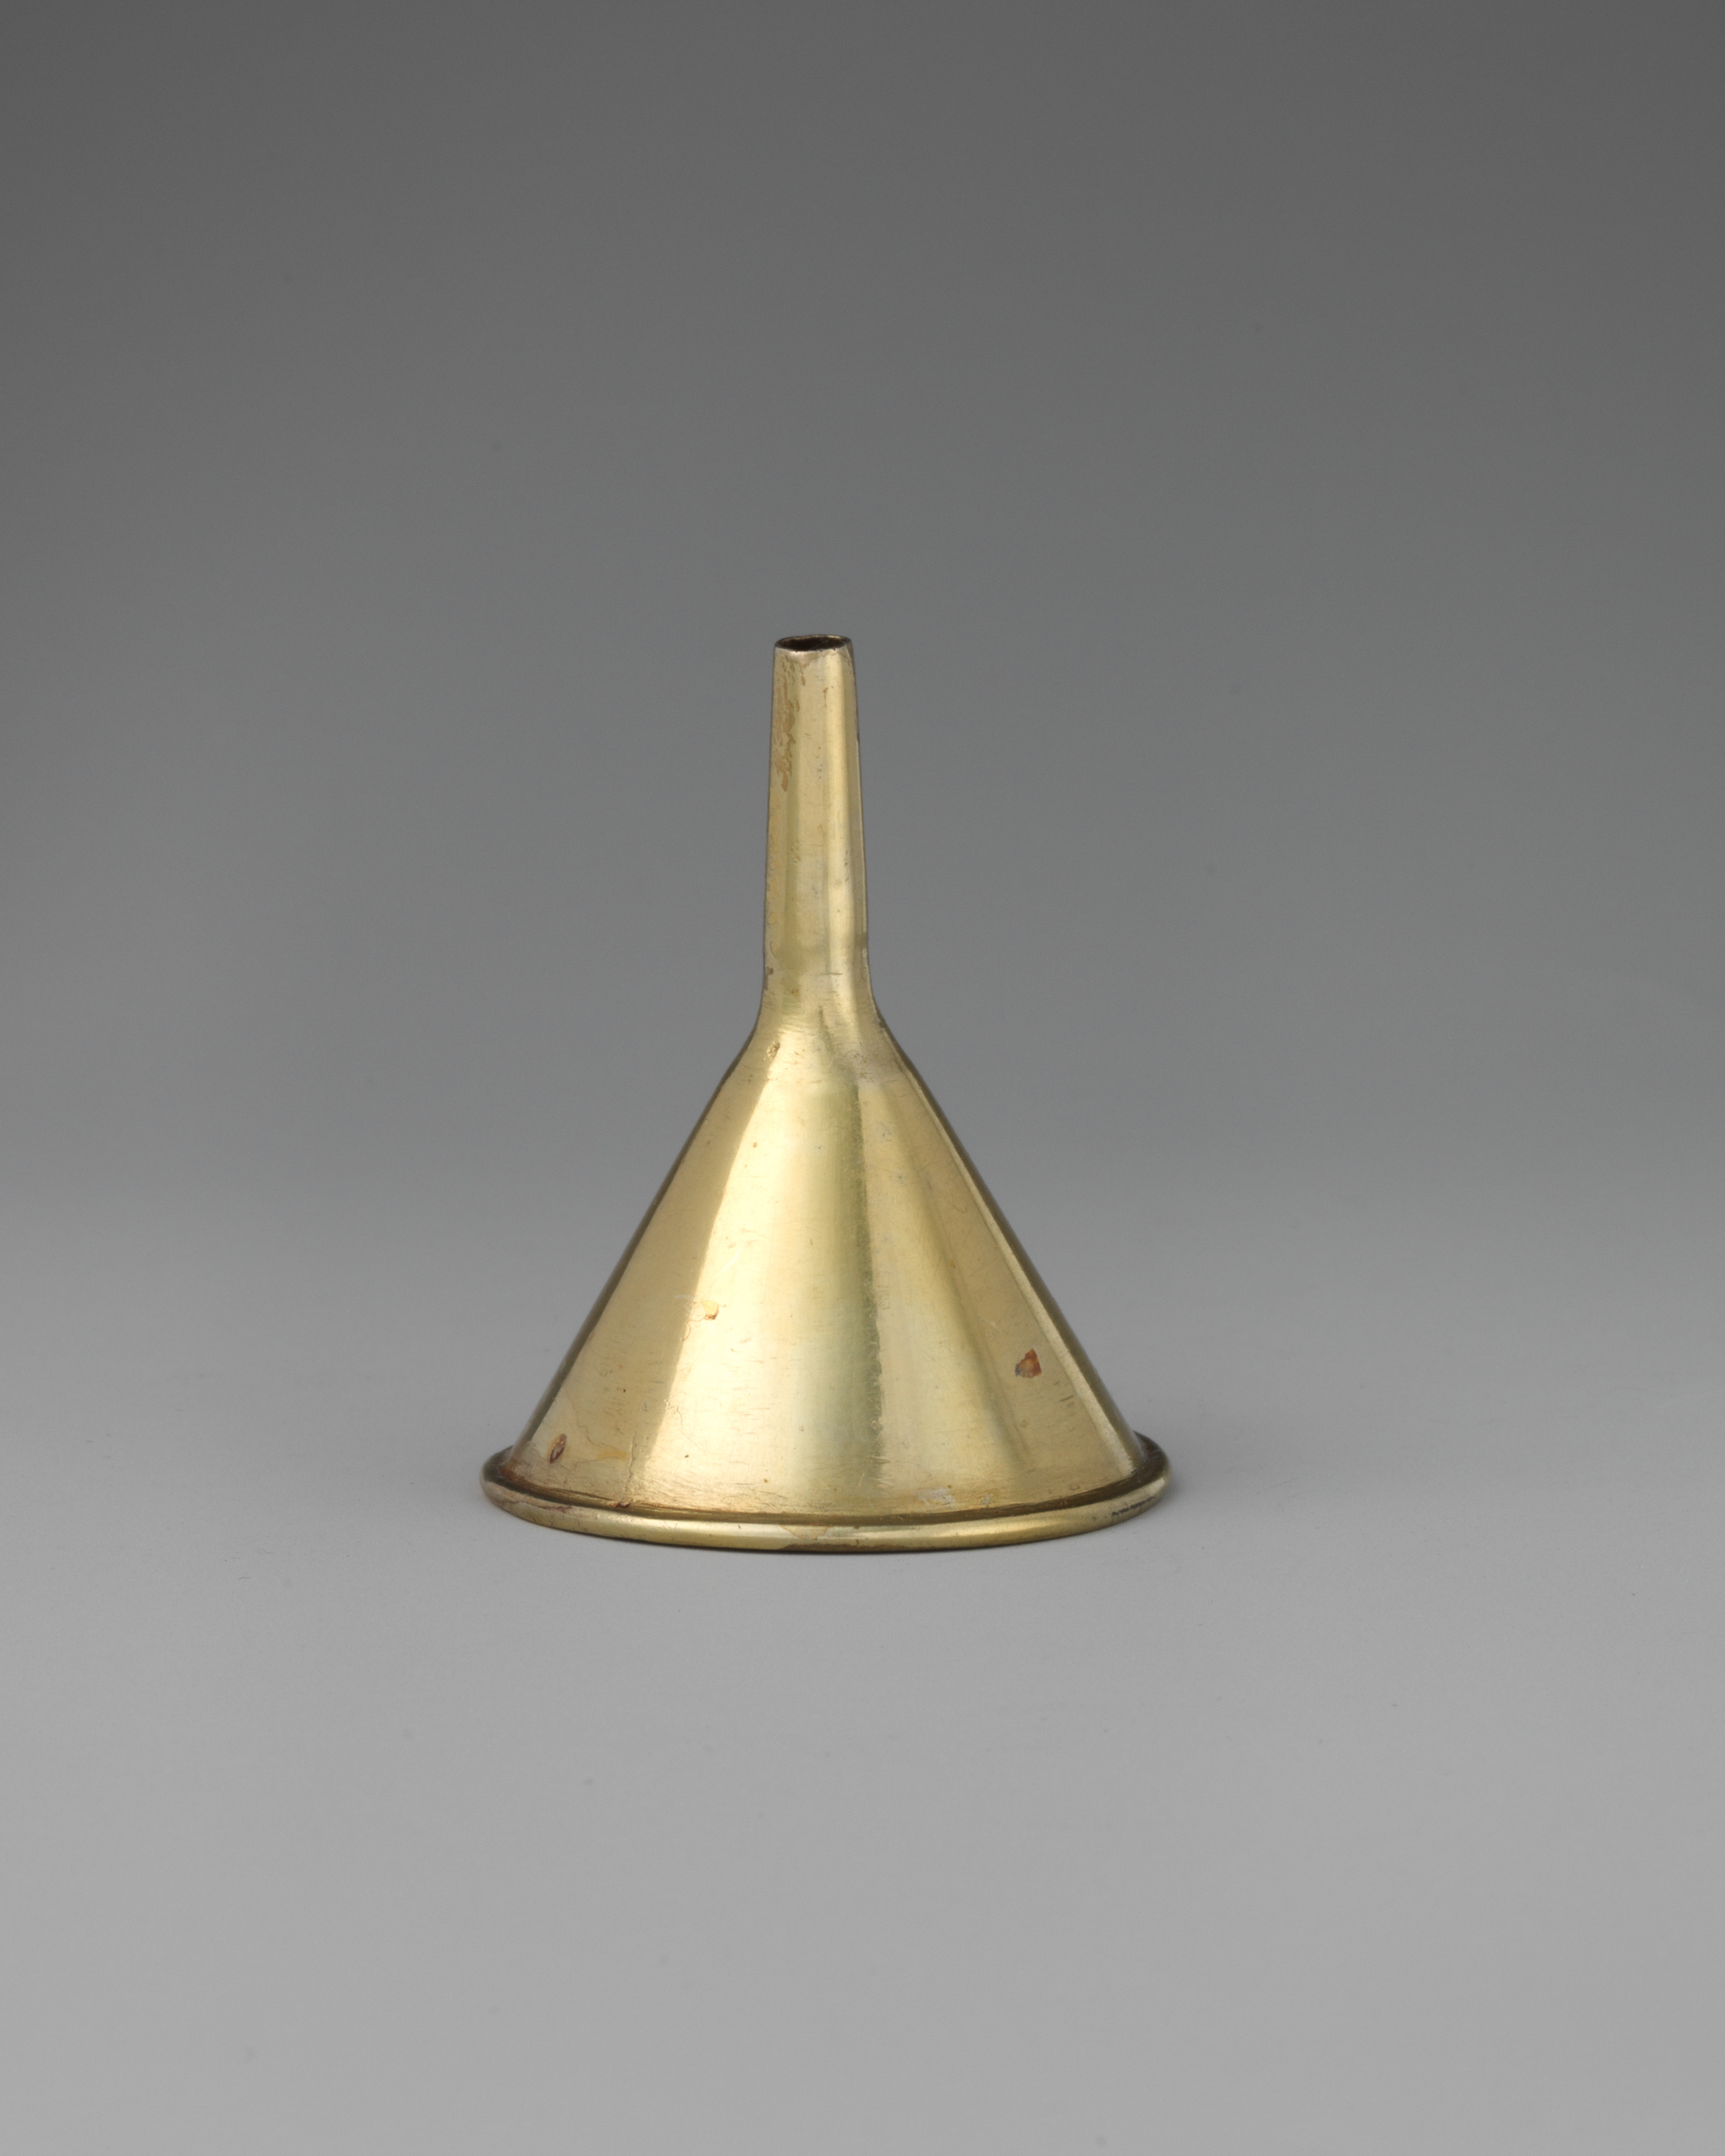 Miniature funnel, French